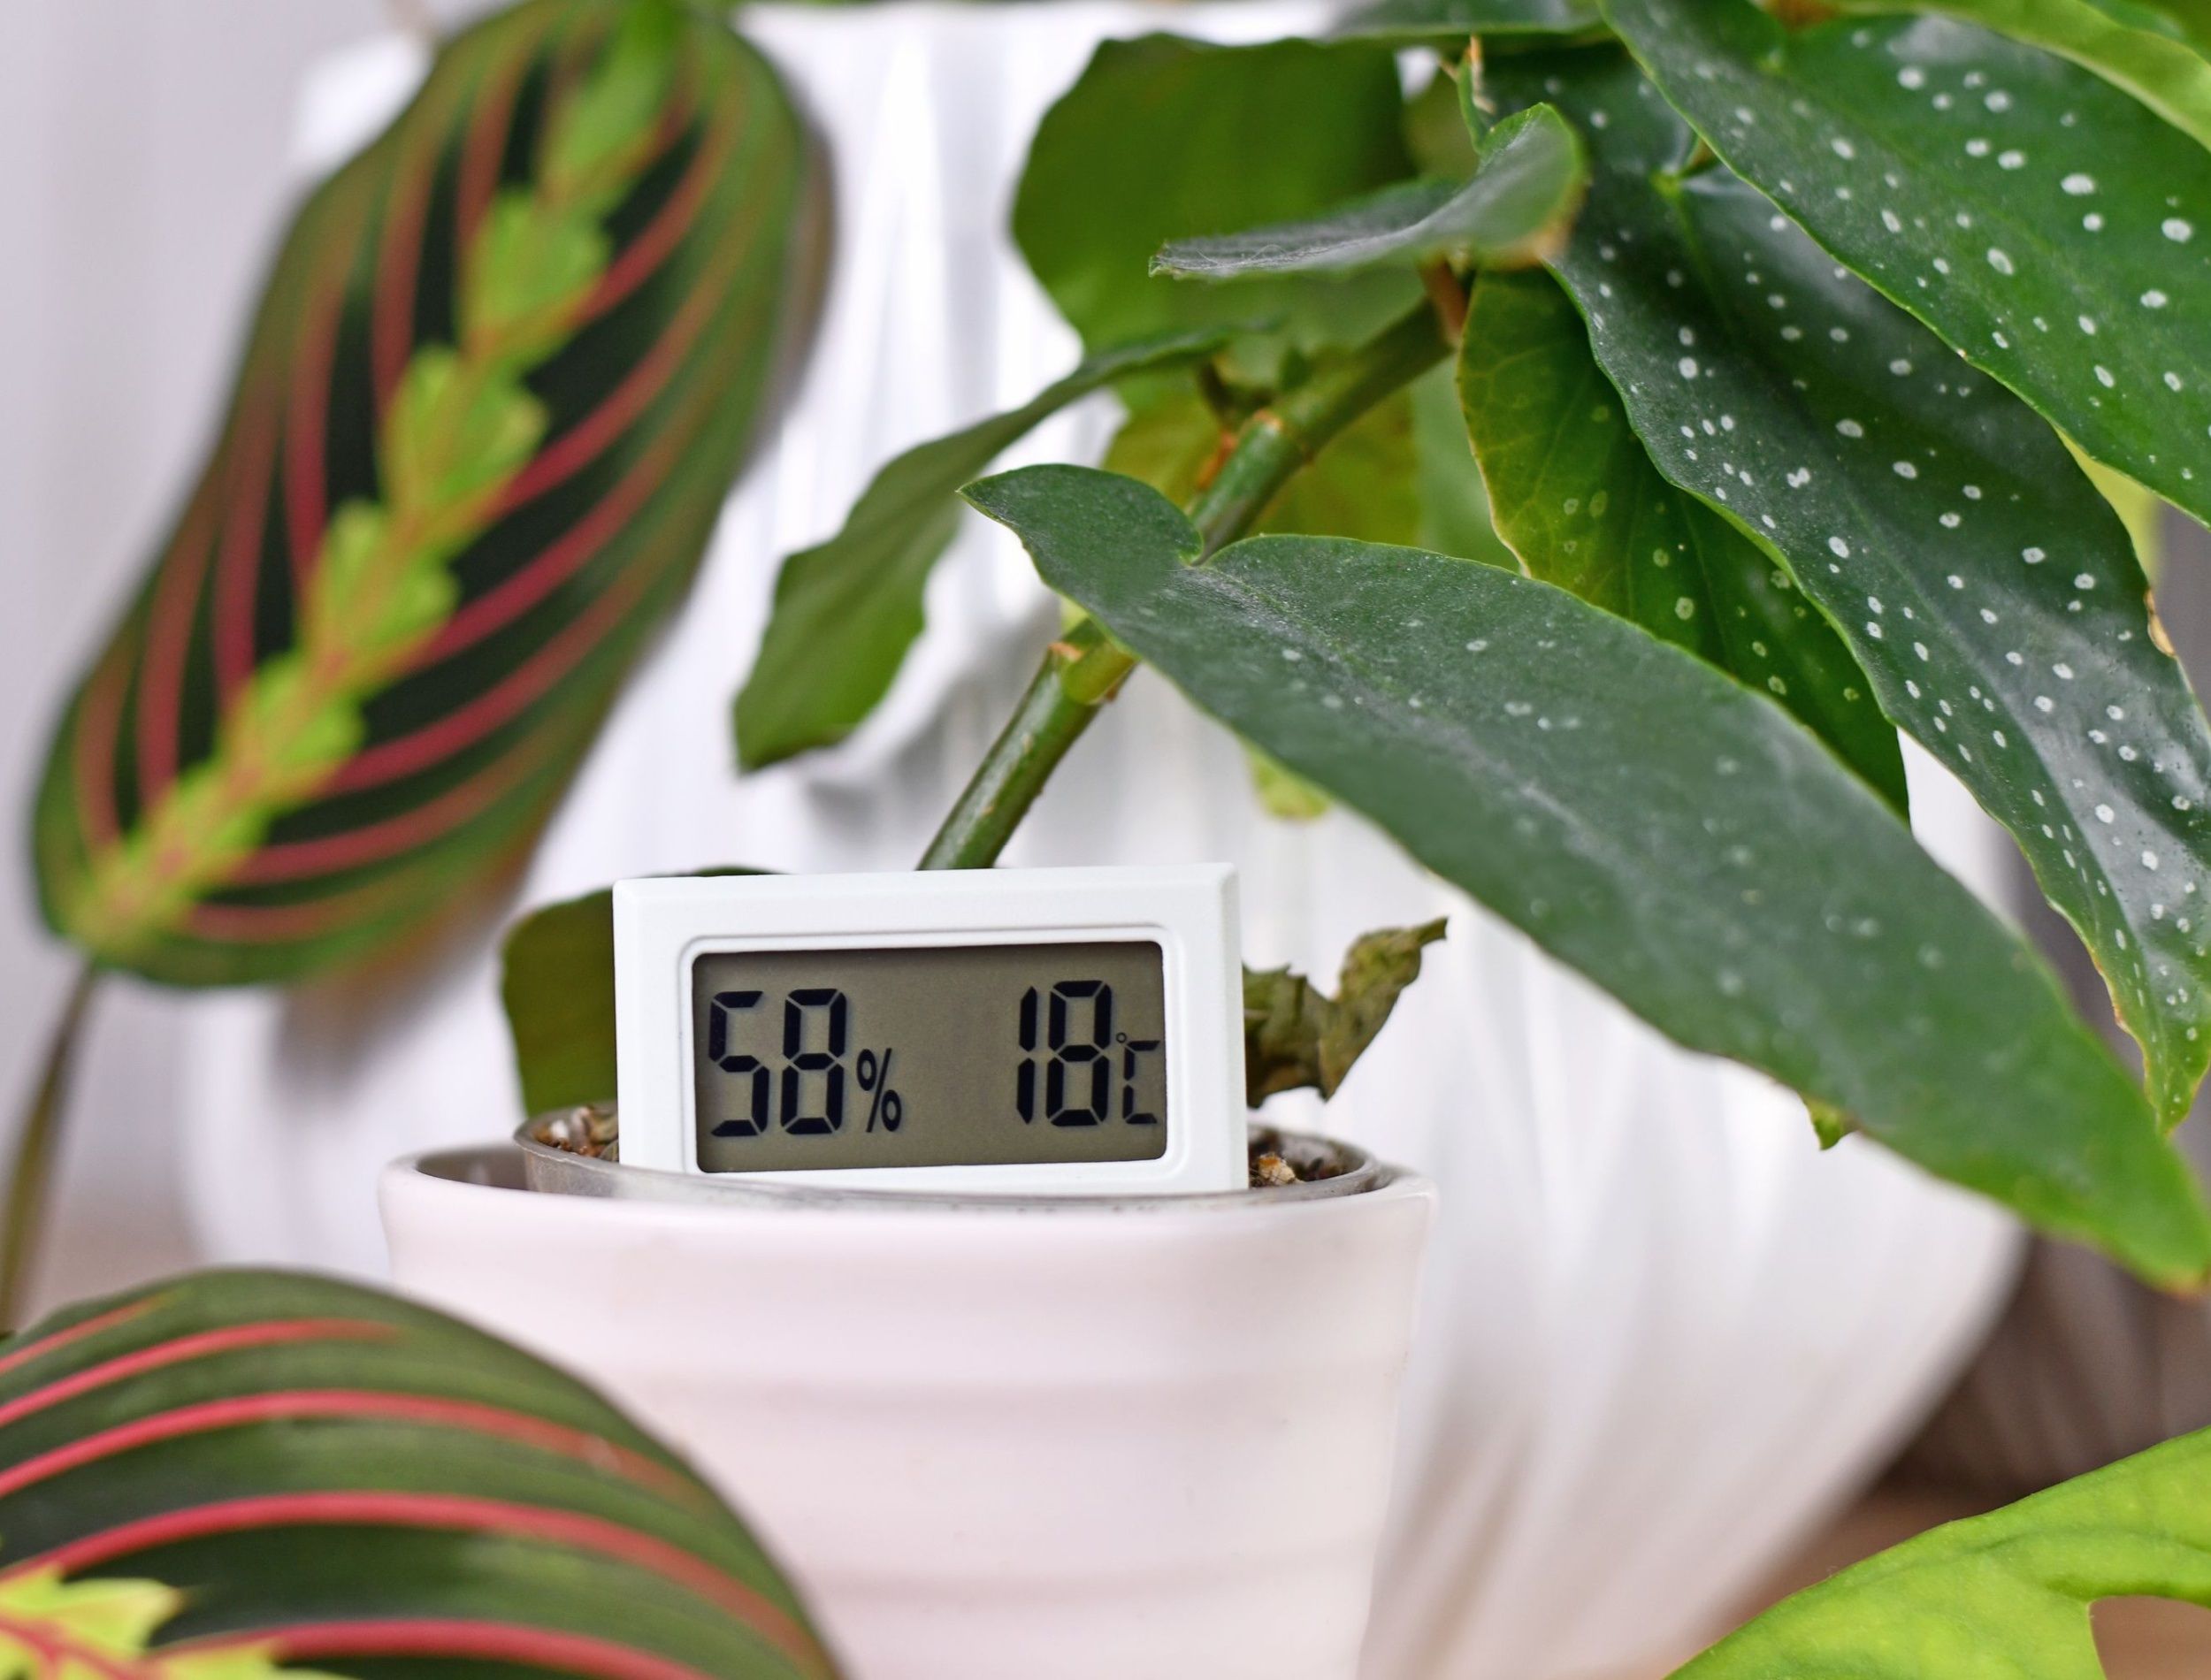 Hygrometer and thermometer device to measure humidity and temperature for houseplants